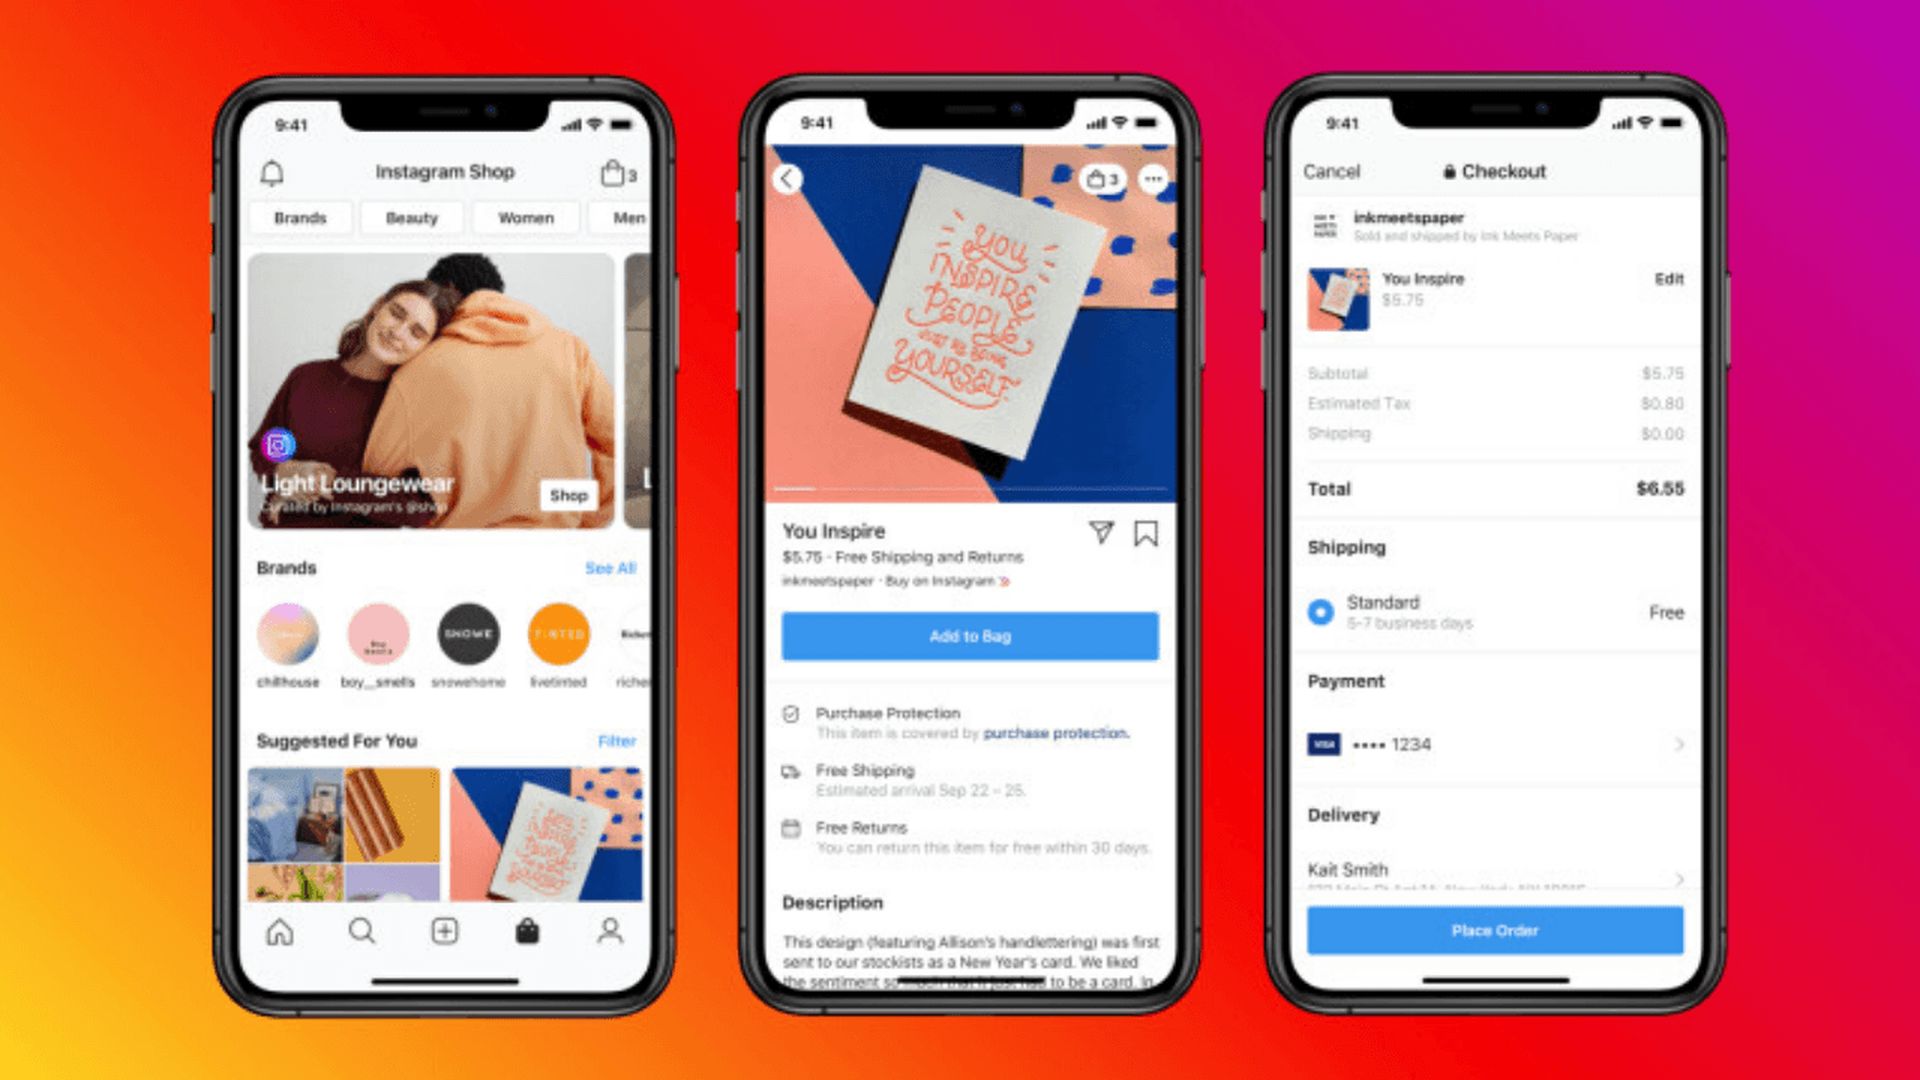 Learn how to sell on Instagram with Shopify here. We explain how does Instagram shopping work and how to add Instagram feed to Shopify in this post.